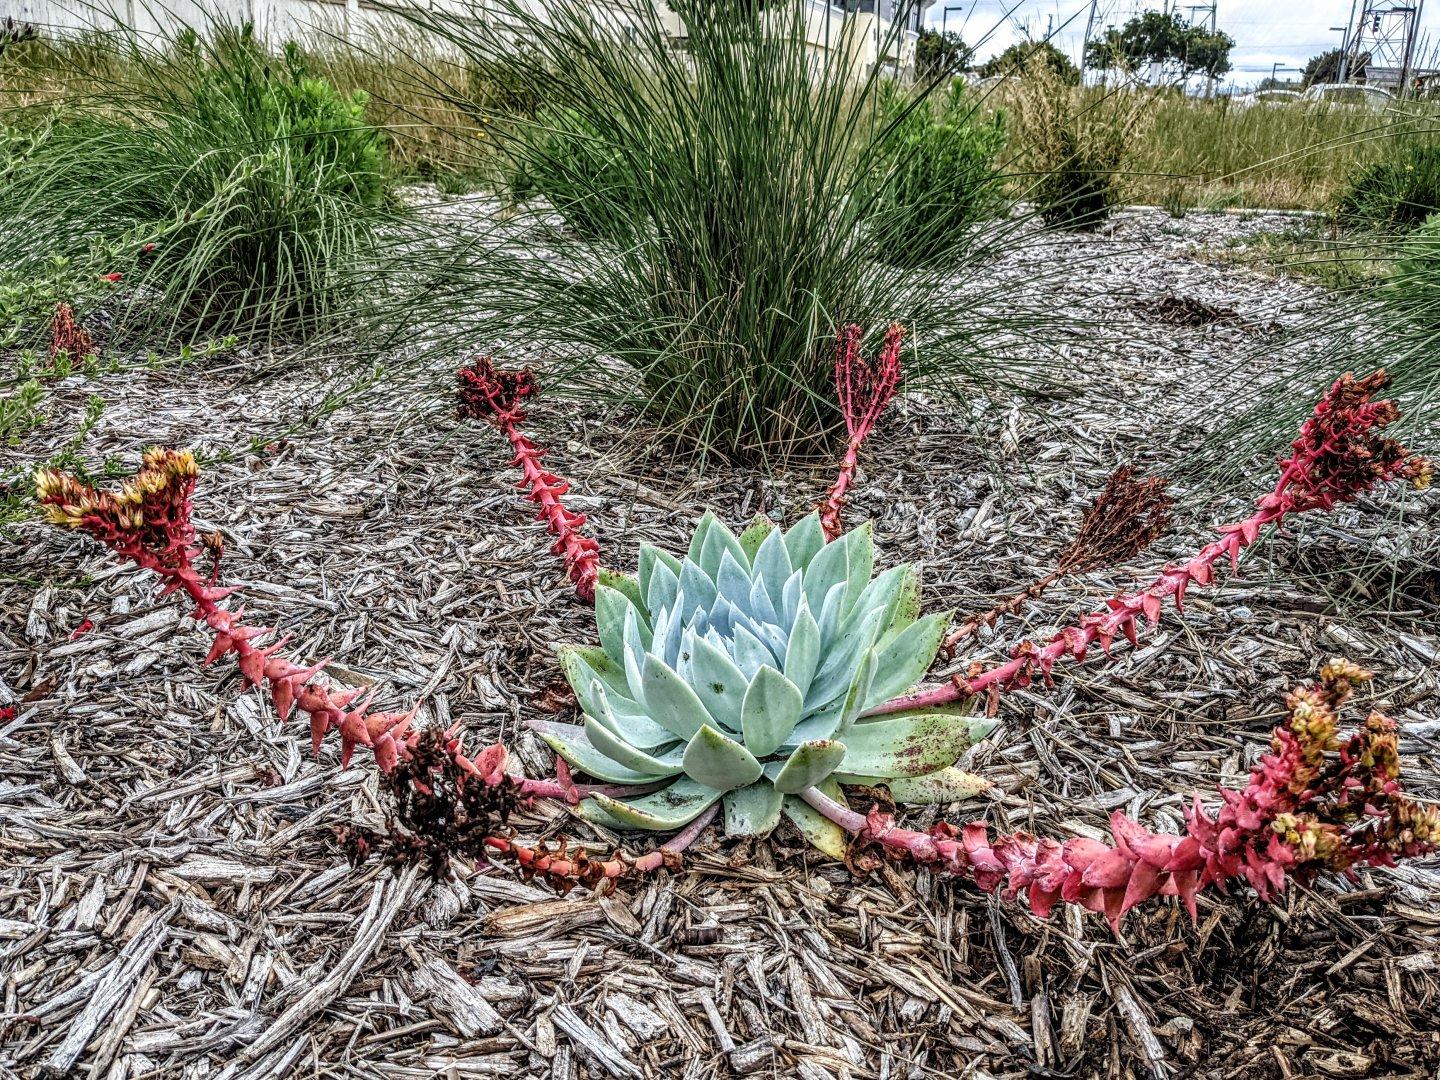 I don't think I've seen this variety of succulent flowering before. It looks like an overturned Ferroseed or the plant version of the Omnidroid from The Incredibles.